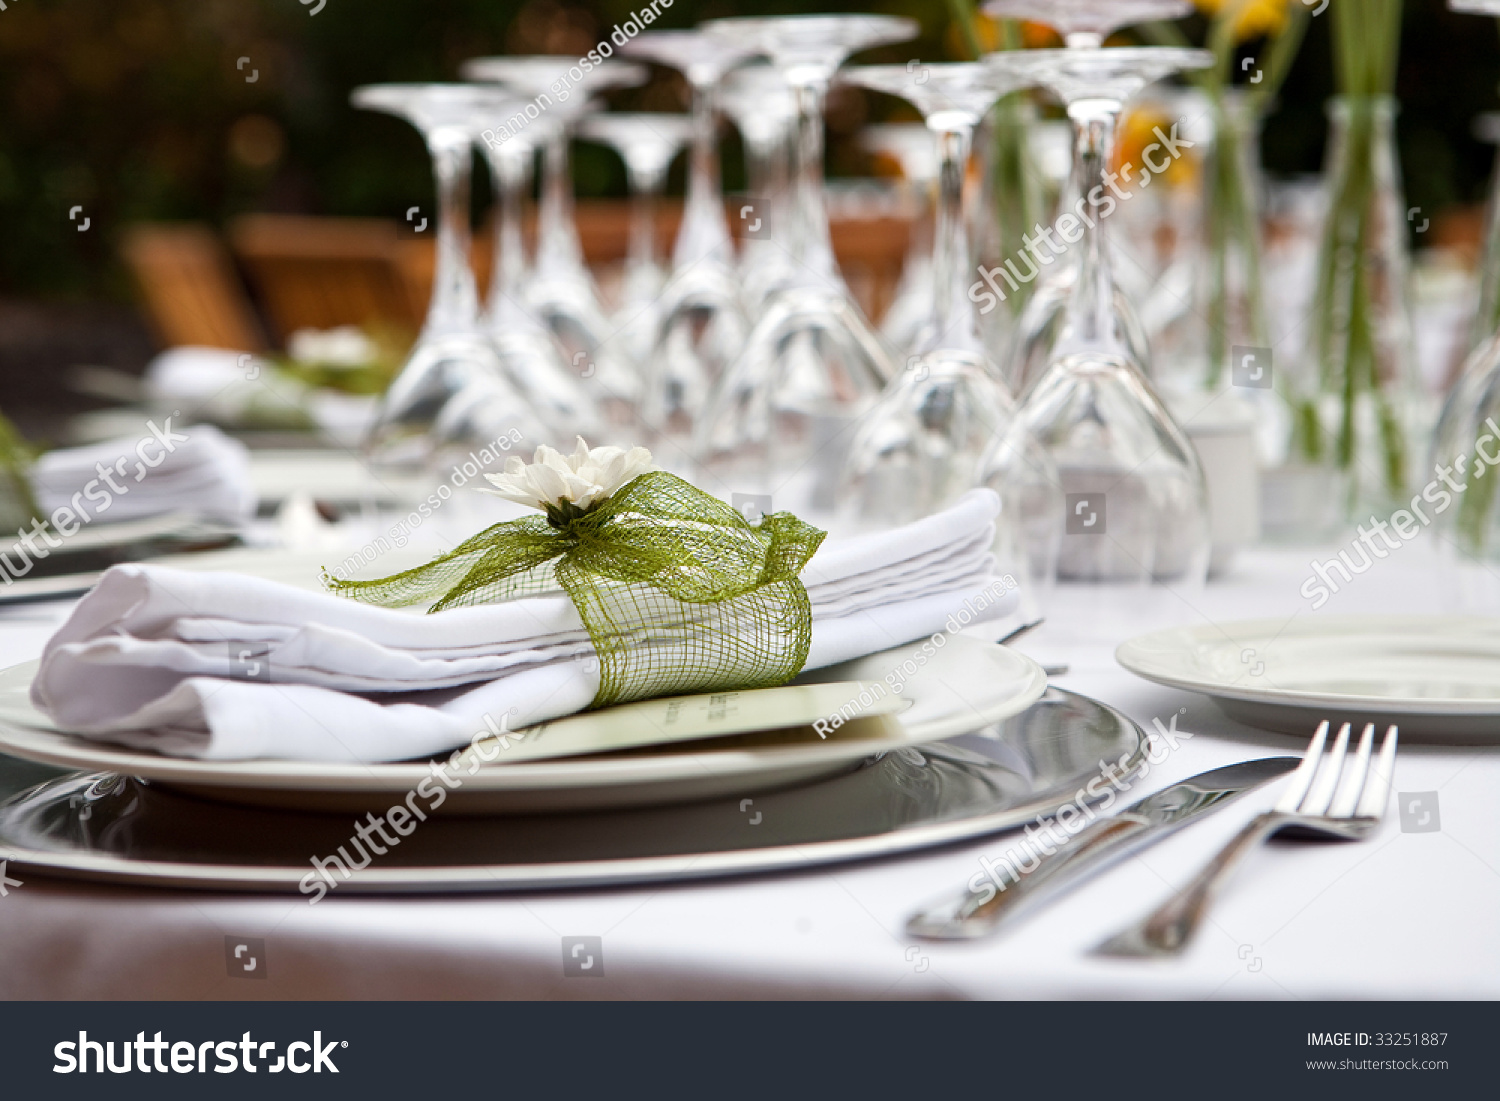 Table setting for a wedding or dinner event with flowers #33251887